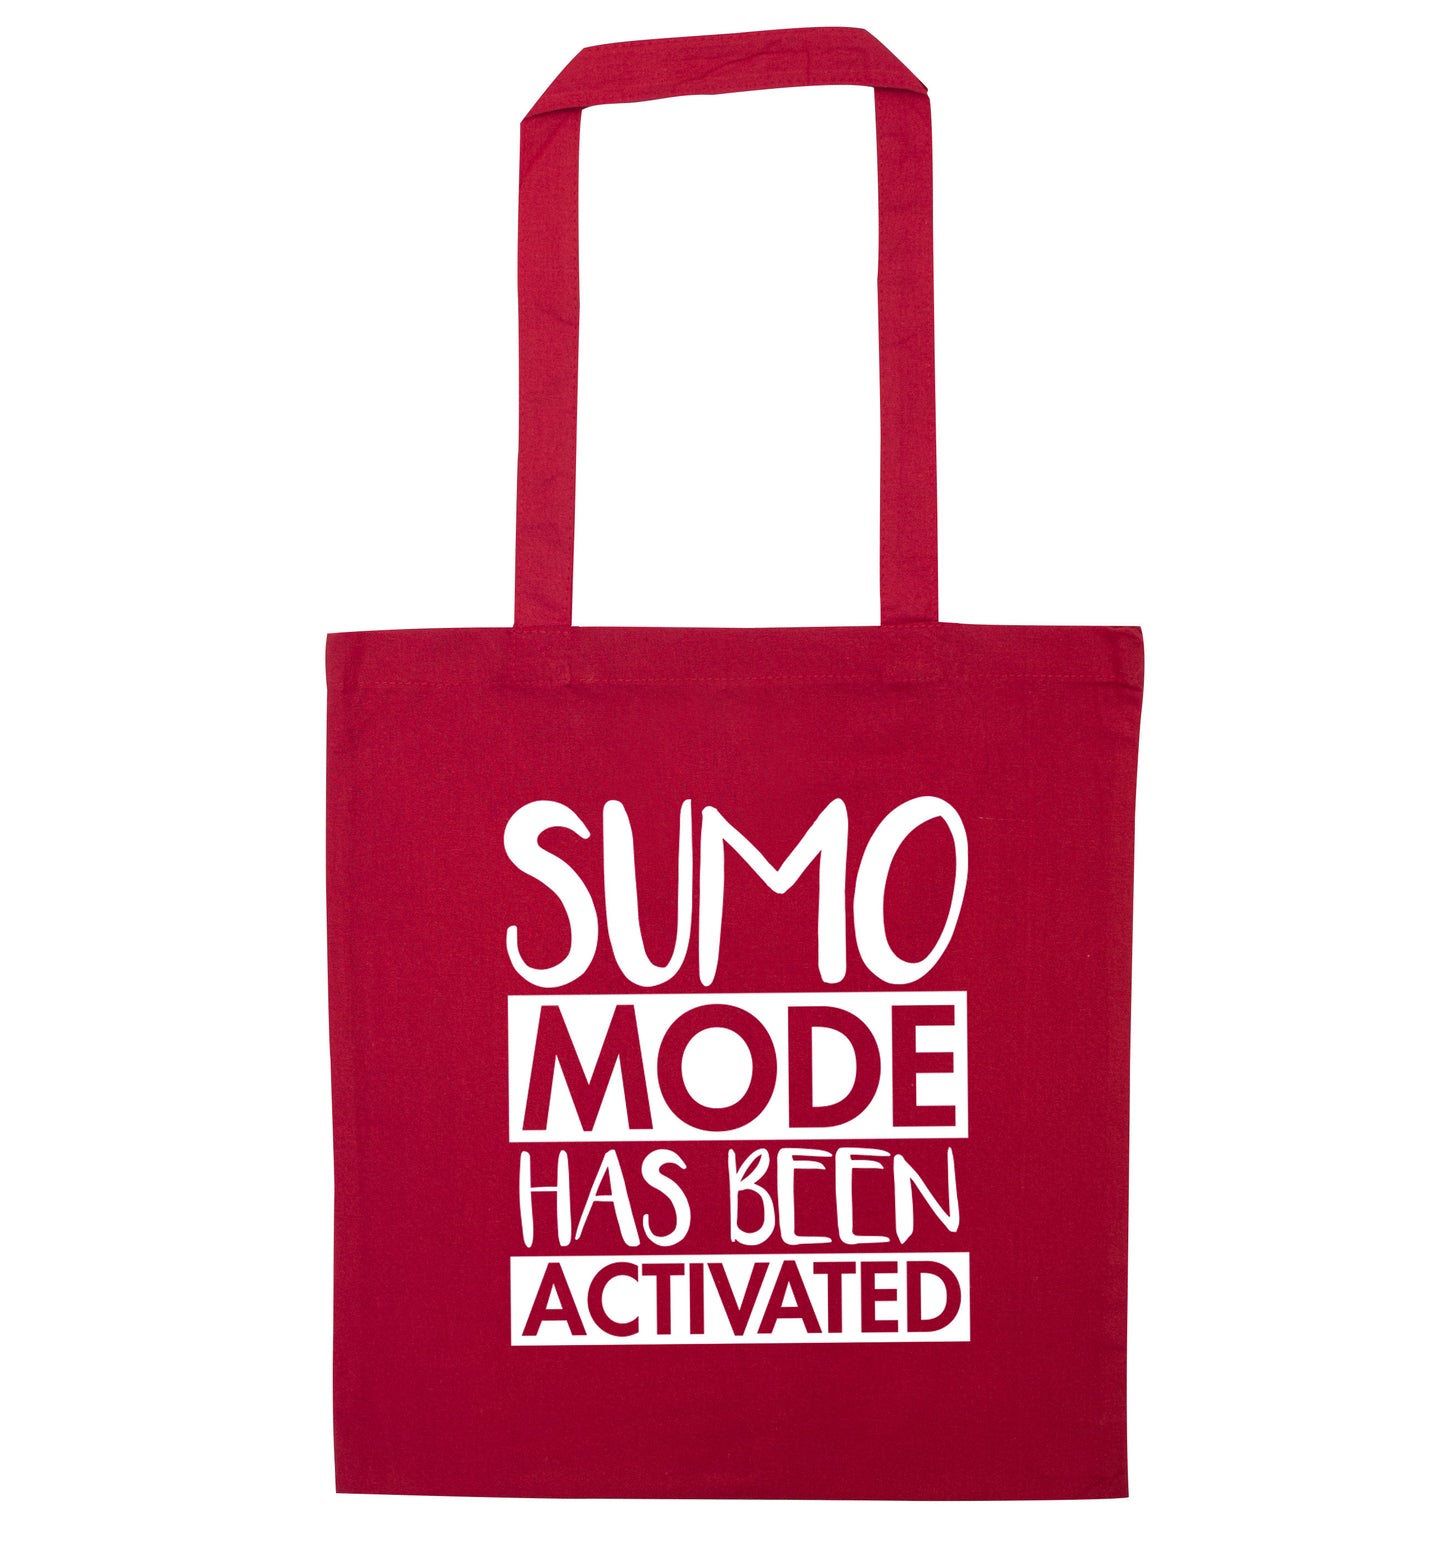 Sumo mode activated red tote bag